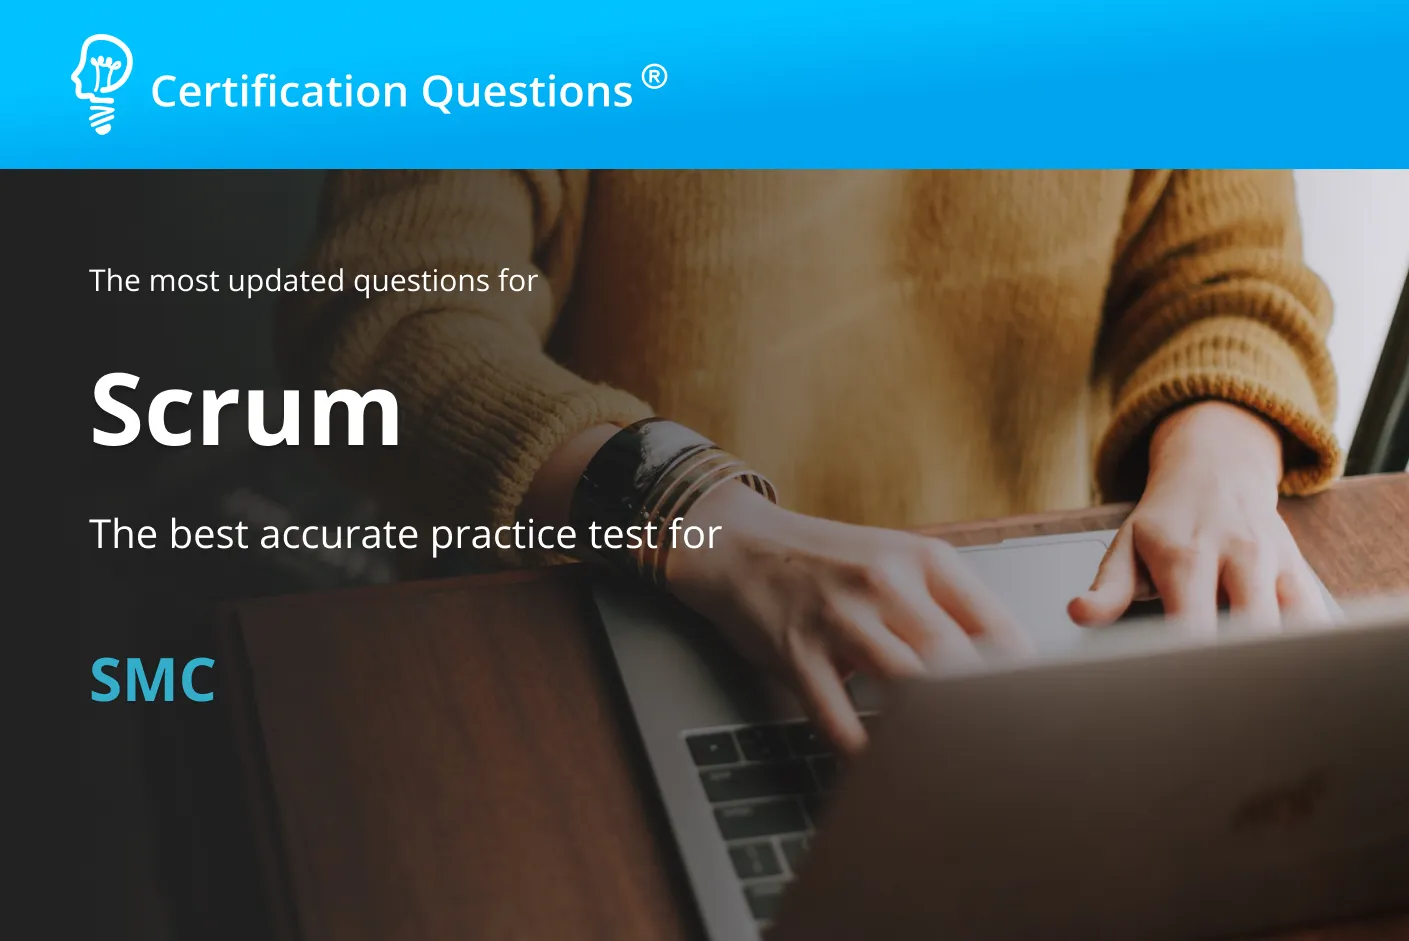 This is the image indicates certified scrum master practice test